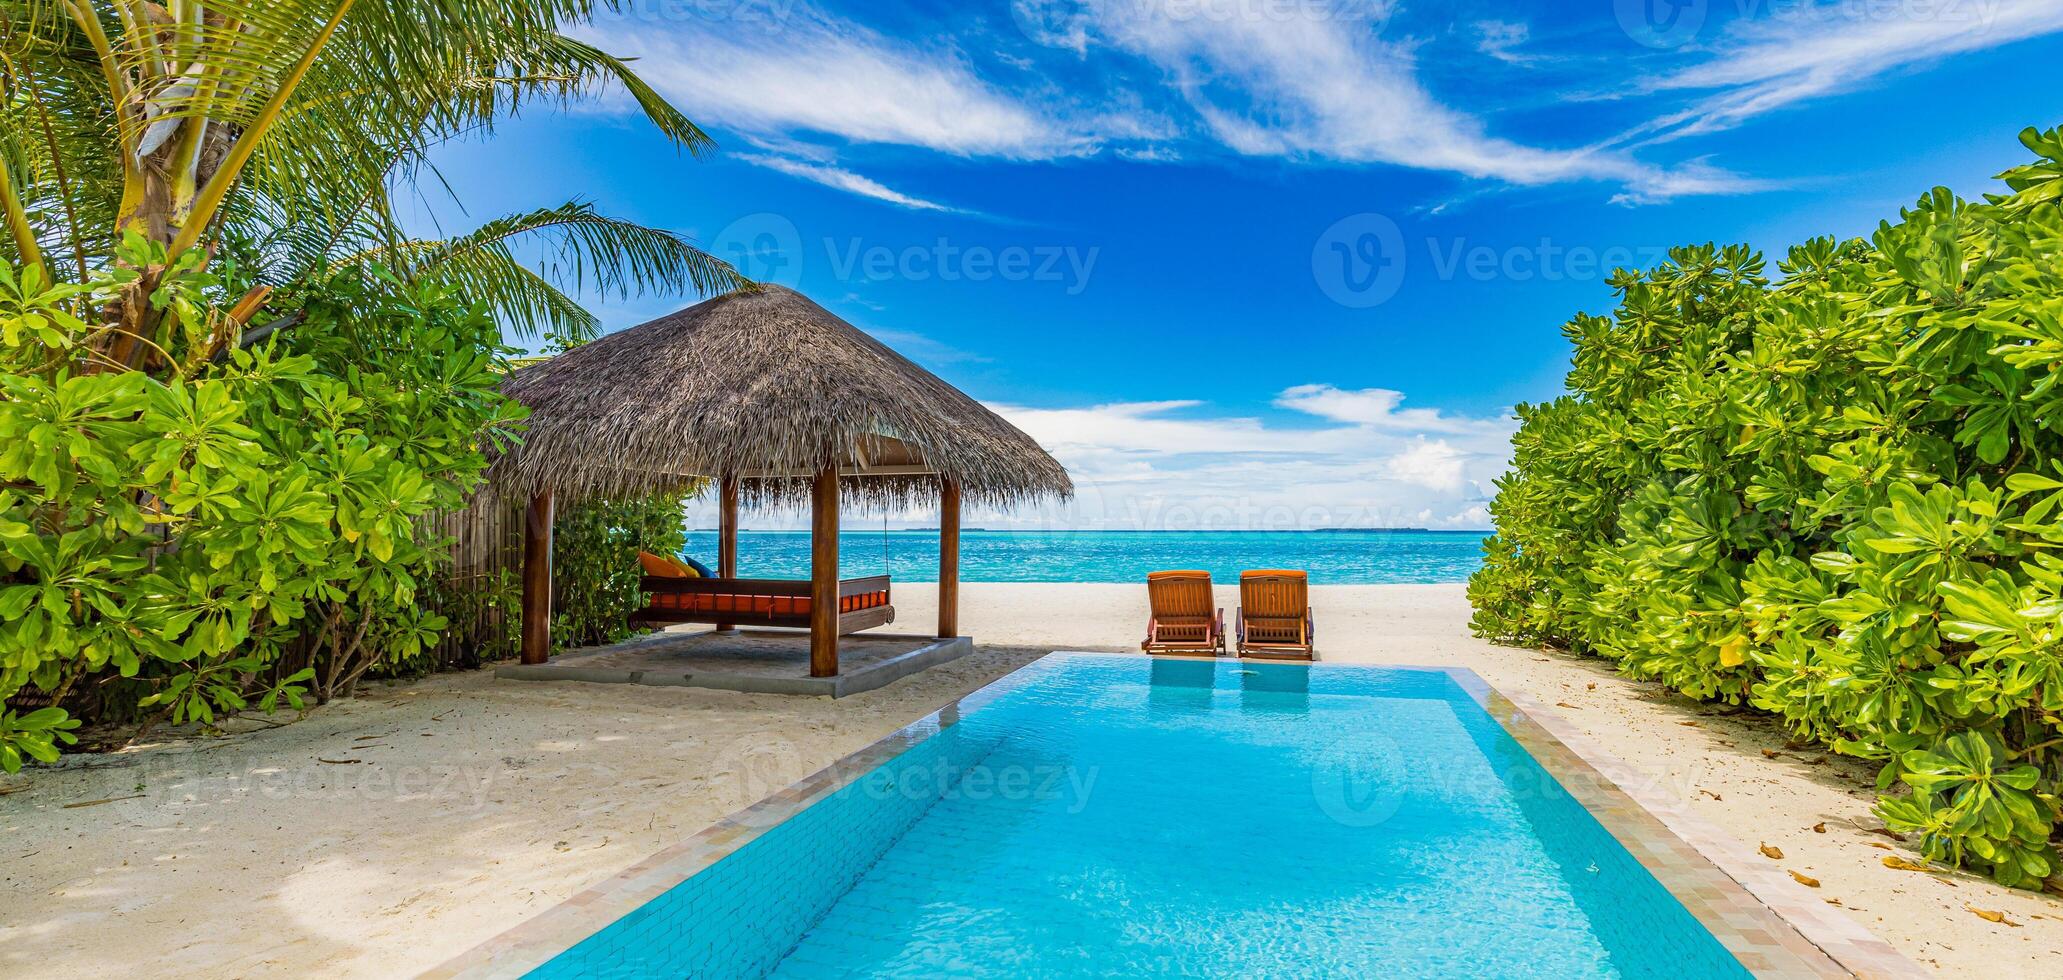 Tropical relax, outdoor tourism landscape. Luxury beach resort with private swimming pool and beach chairs or loungers under umbrellas palm trees, sunny blue sky. Summer travel and vacation background photo